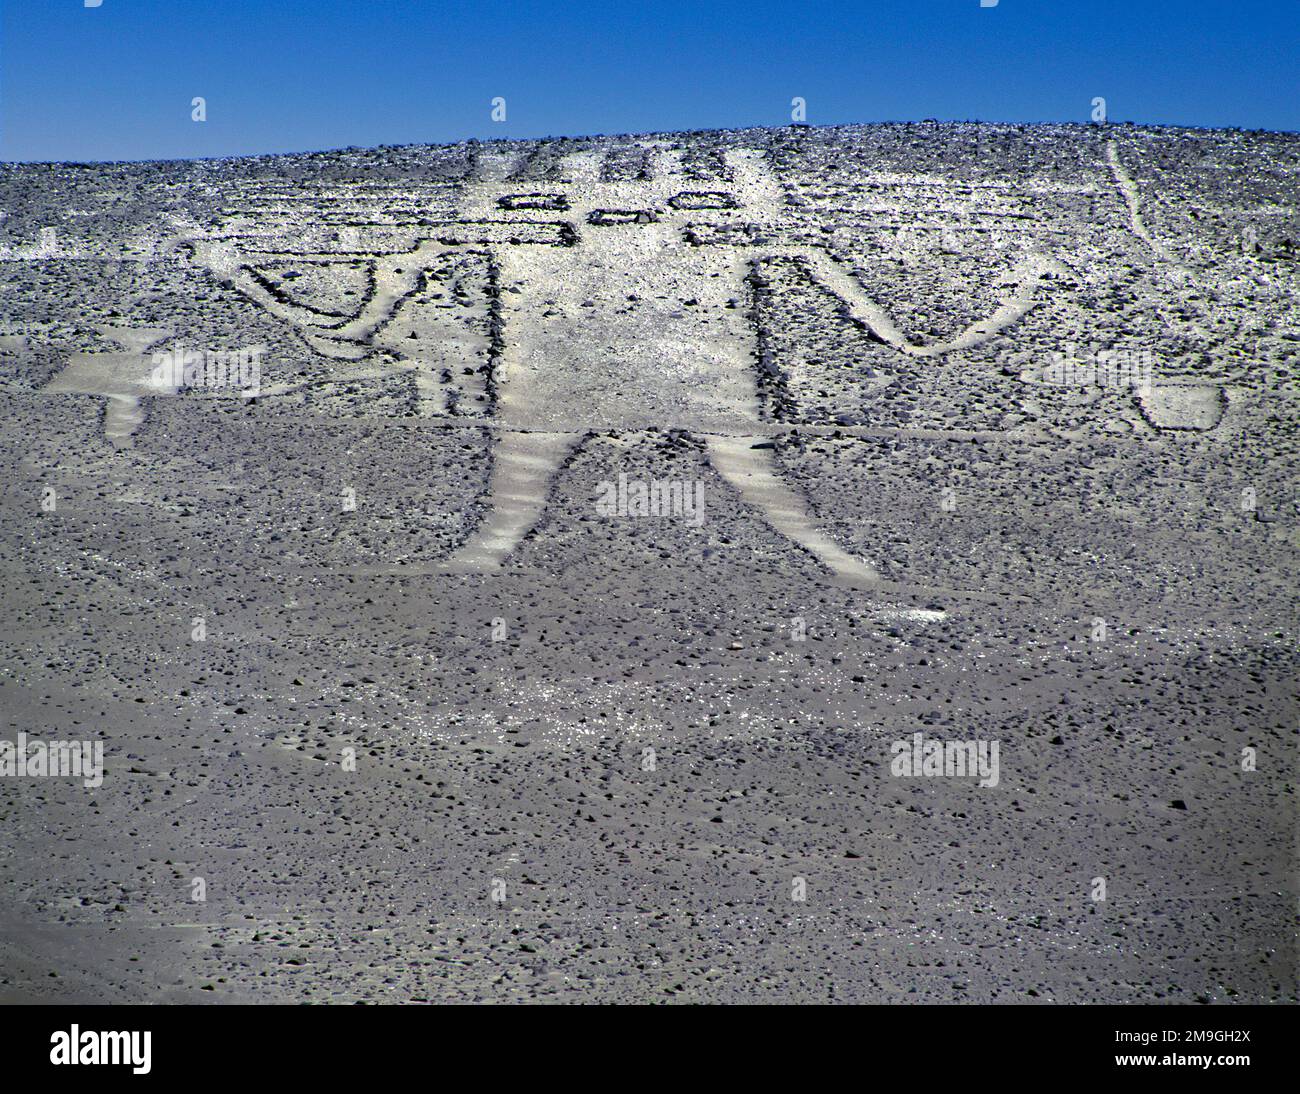 Famous Atacama Giant, Giant of Tarapacá or Geoglyph of Cerro Unita is a 119-meter long figure carrying water drawn on the slope of Cerro Unita's surfa Stock Photo